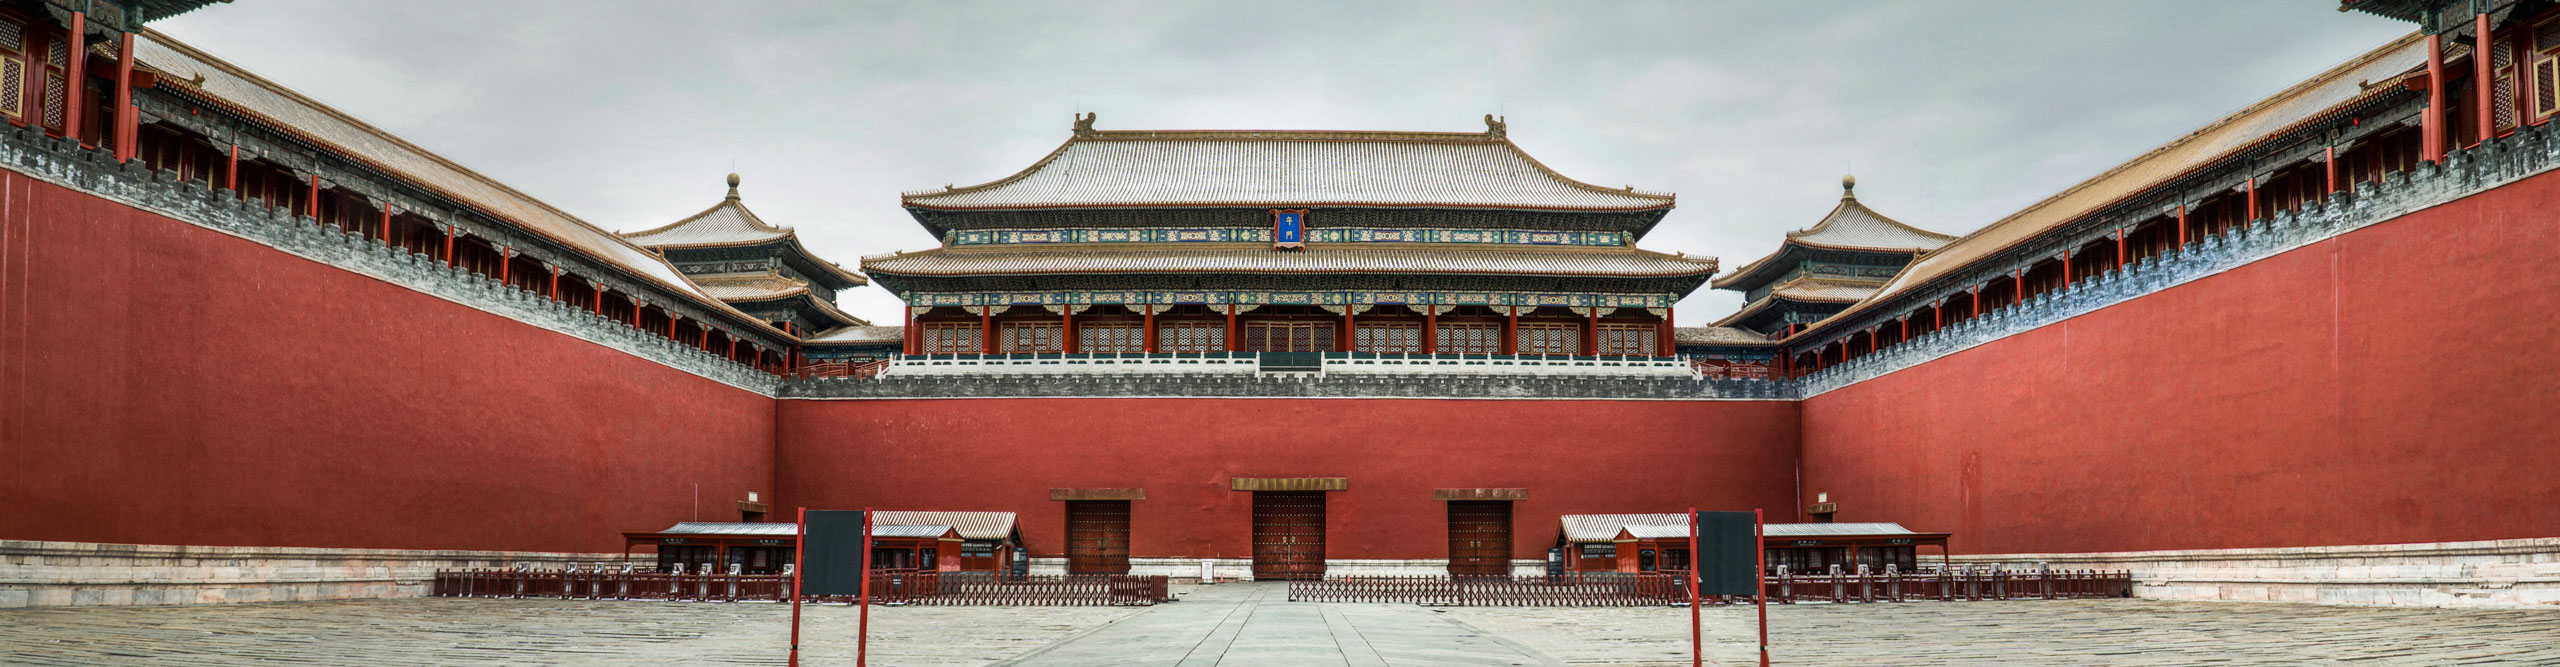 The red walls and intricate roof of Forbidden City after snow, Beijing, China.